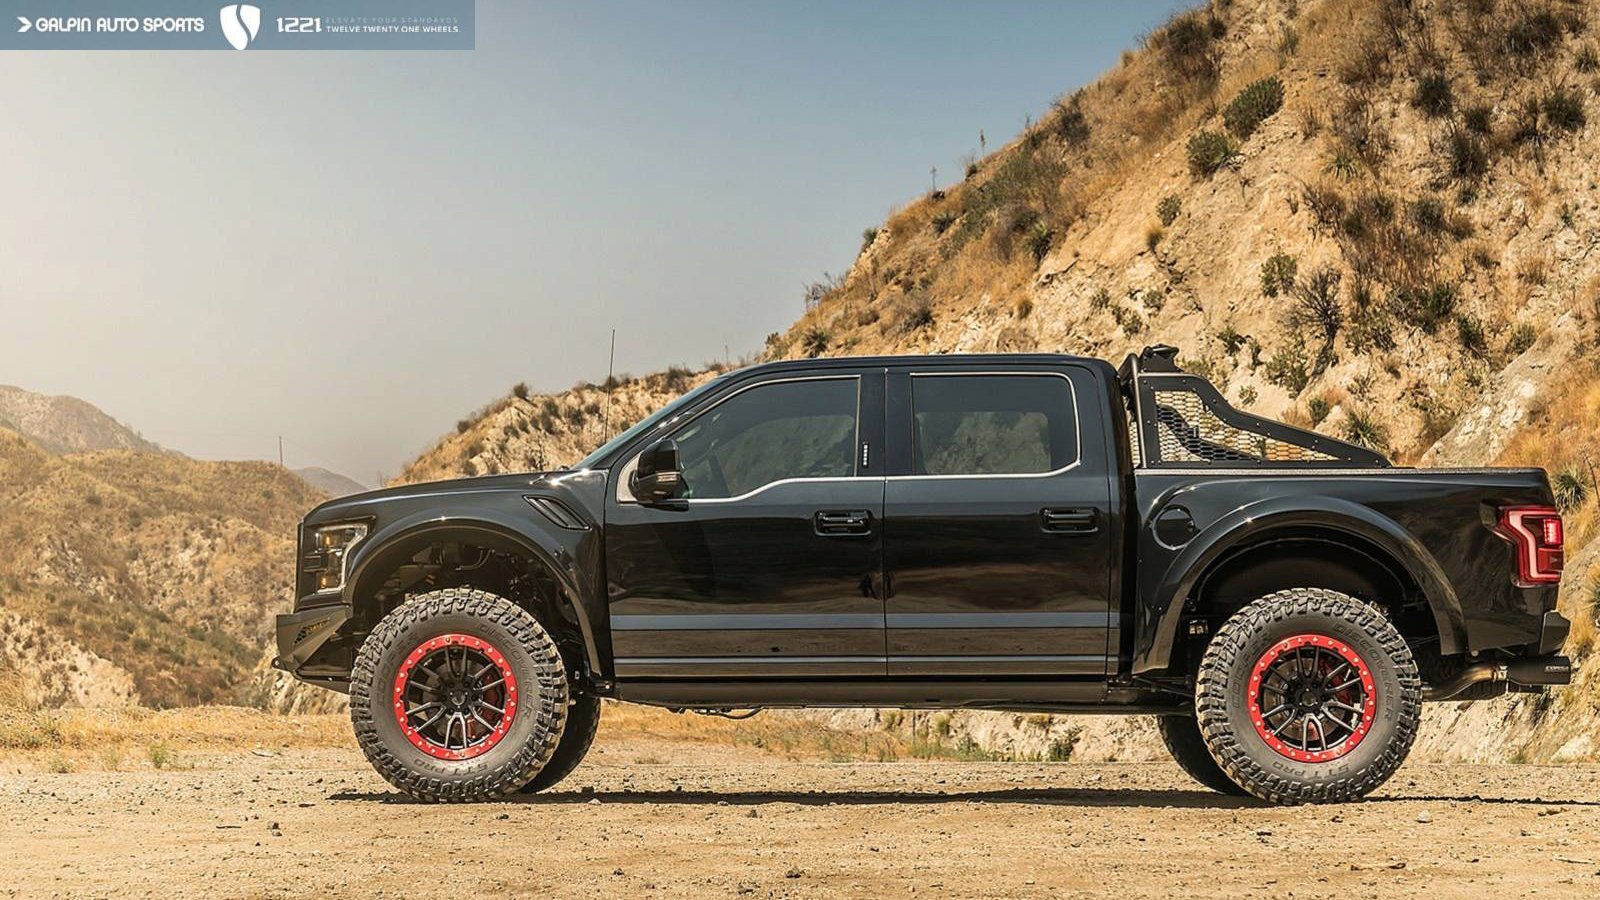 Retractable Running Boards on Black Lifted Ford F-150 - Photo by Galpin Auto Sports